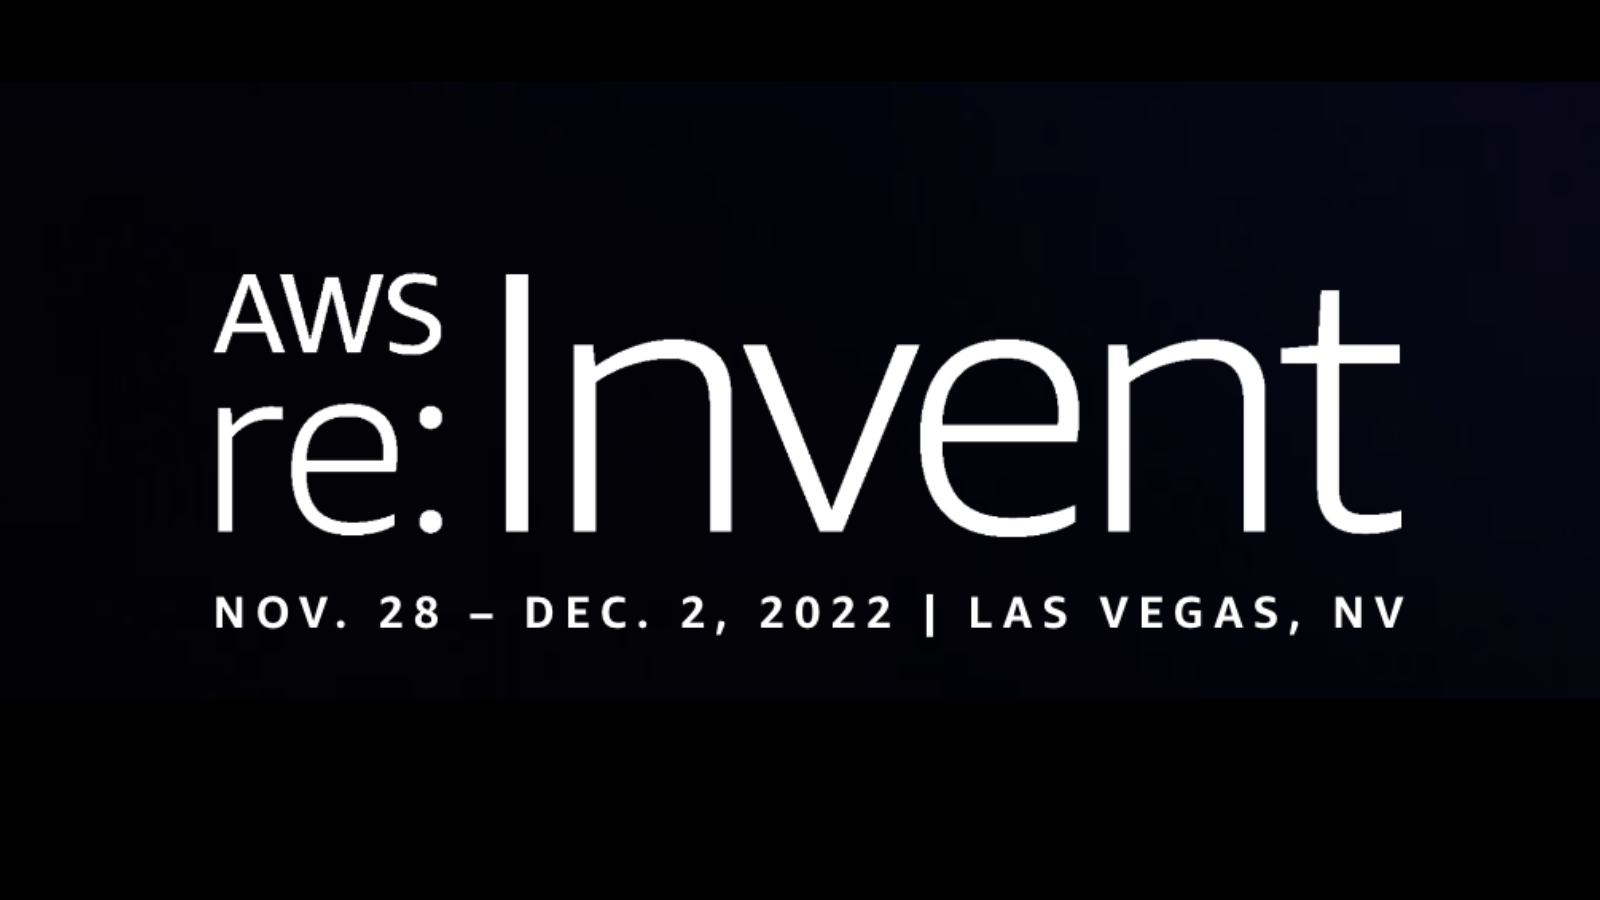 HashiCorp at AWS re:Invent: Examining the State of Your Cloud Operating Model